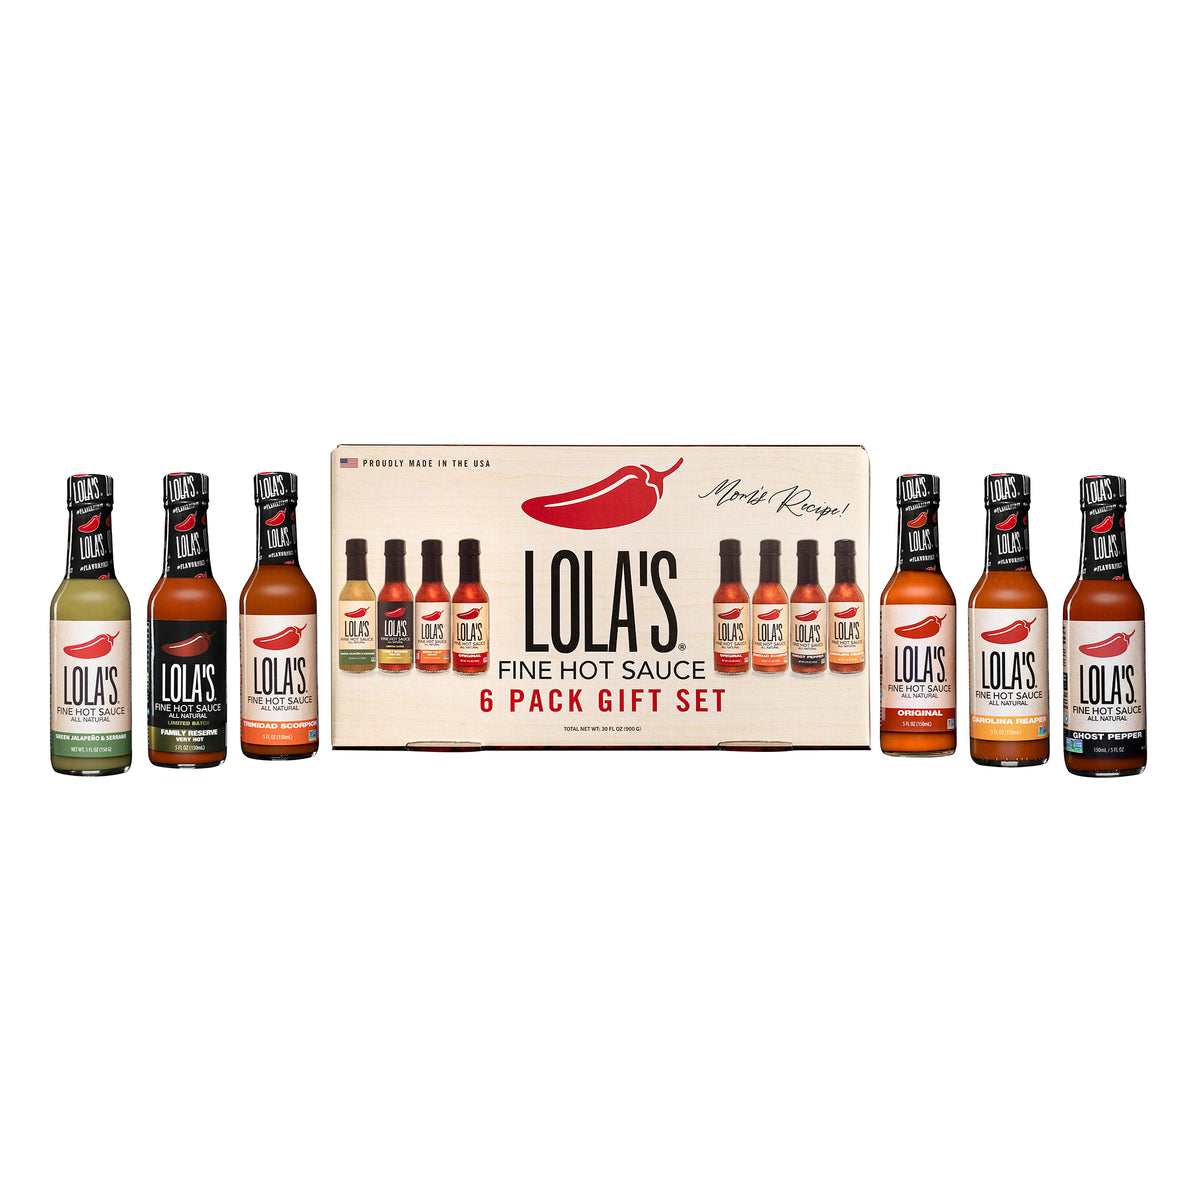 A group of hot sauce bottles in Lola's Fine Hot Sauce Gift Set, featuring Lola's Original, Green Jalapeño & Serrano, Ghost Pepper, Trinidad Scorpion, Carolina Reaper, and Family Reserve flavors.